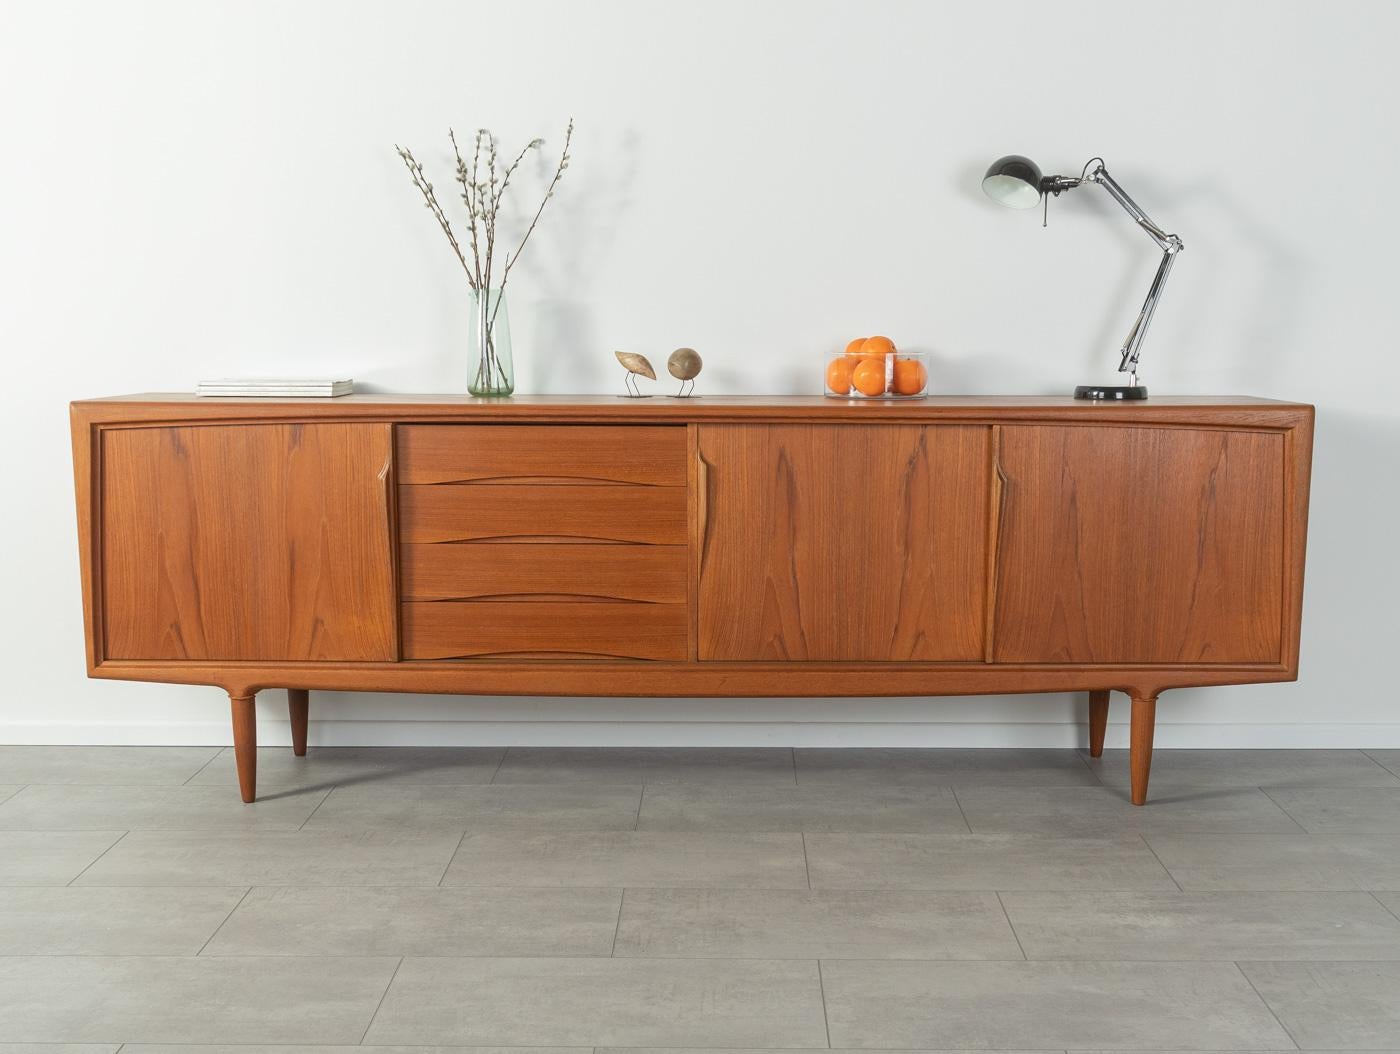 Filigree sideboard by Omann Jun., model 18. High-quality corpus in teak veneer with two sliding doors, an insert shelf, four drawers and cigar shaped feet.
Quality Features:

 Accomplished design: perfect proportions and visible attention to